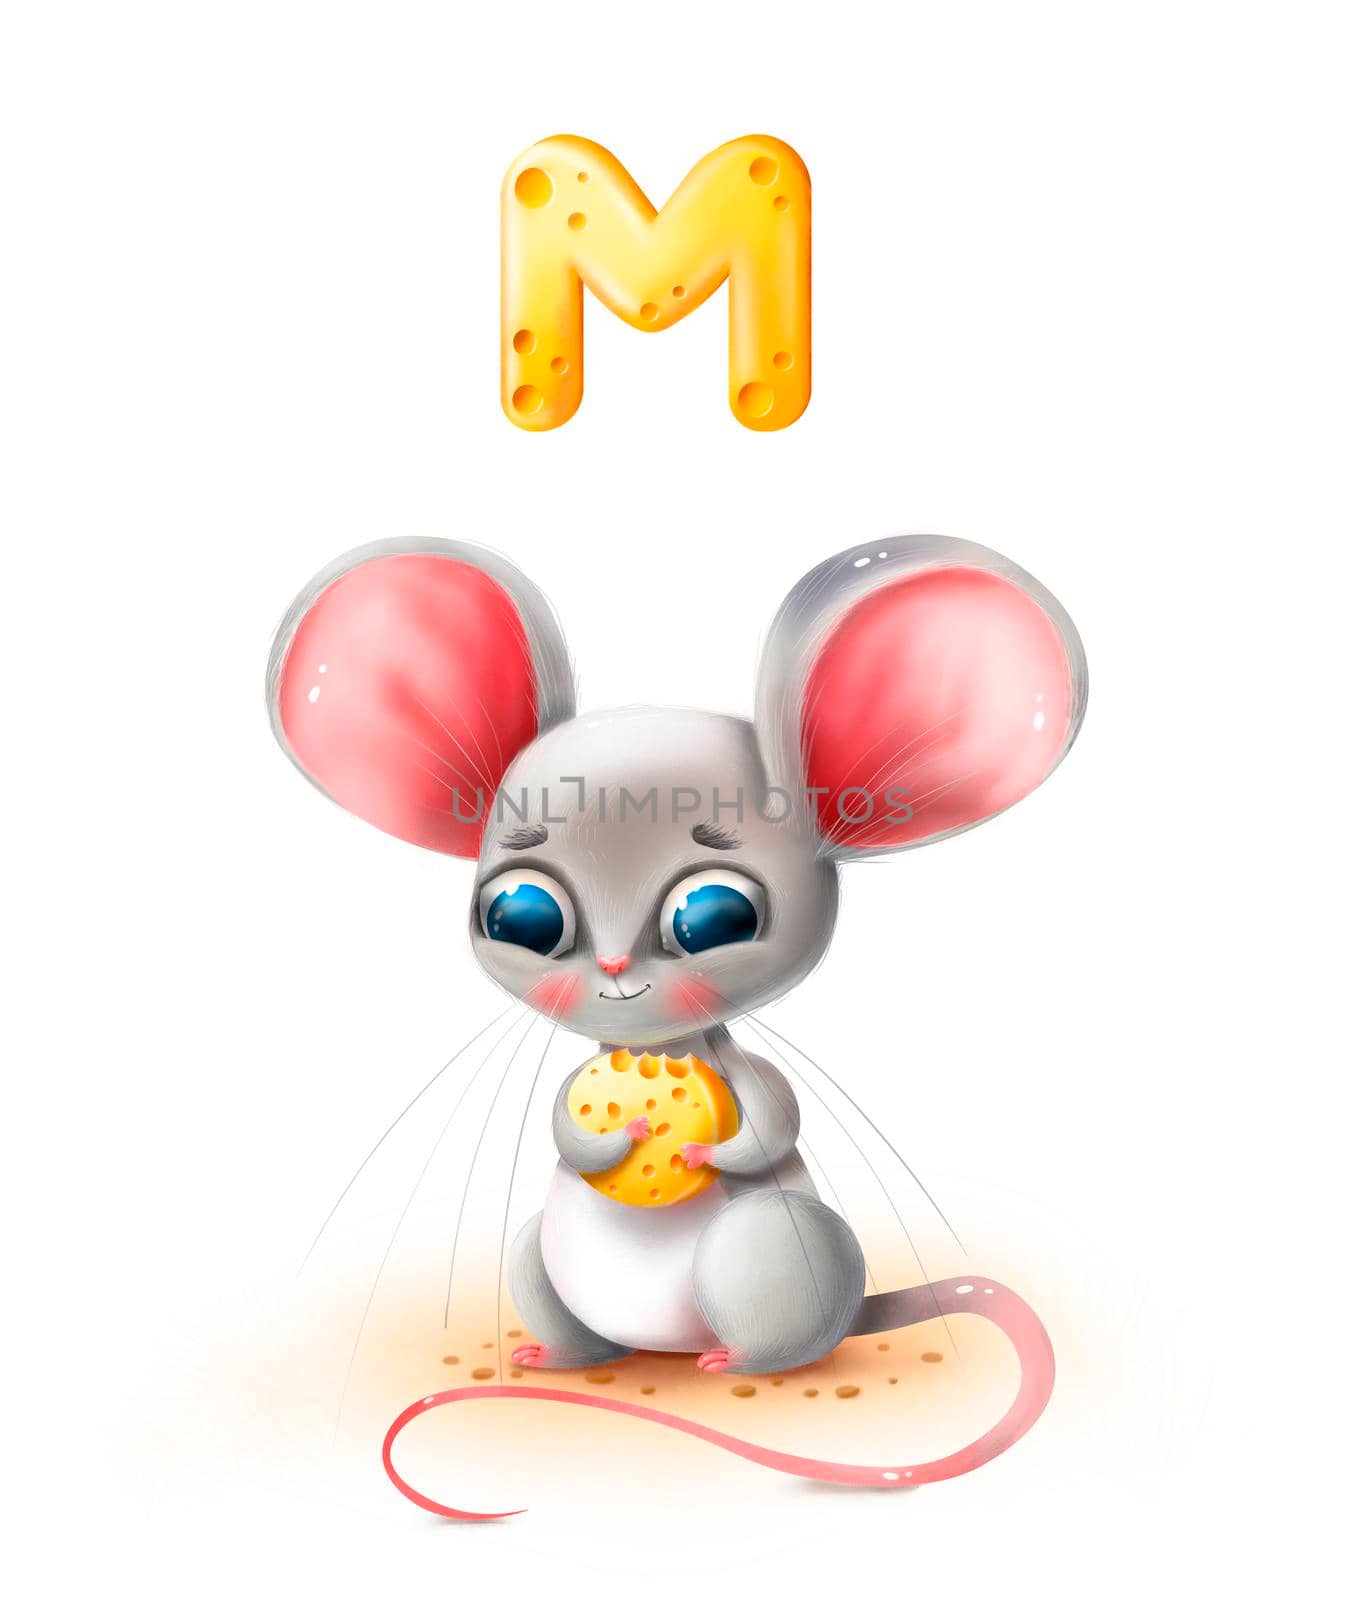 Cute cartoon mouse holds cheese on a white background by studiodav